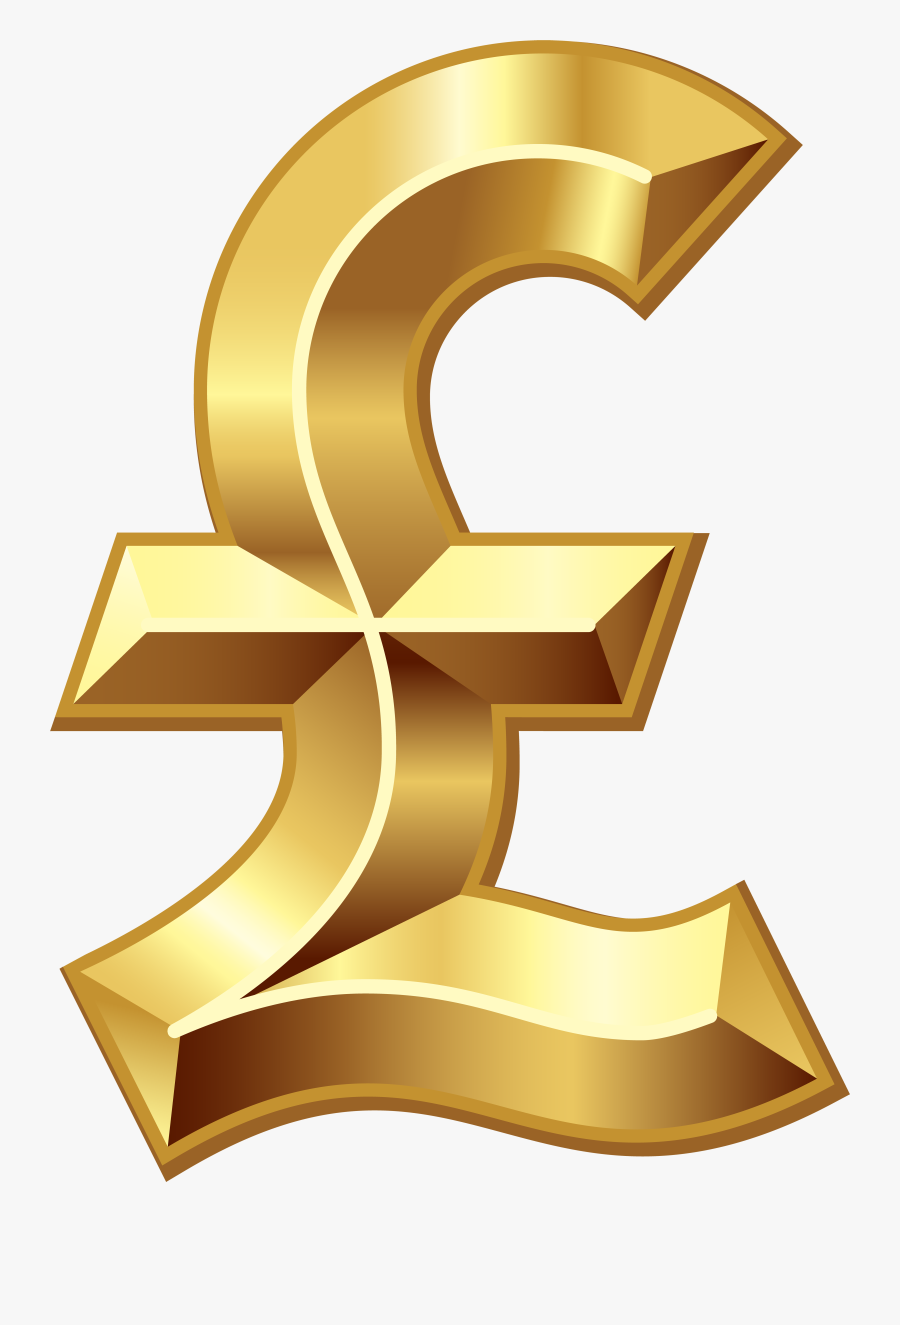 Pound Sterling Dollar Sign Pound Sign Currency Symbol - Pound Sterling Png, Transparent Clipart